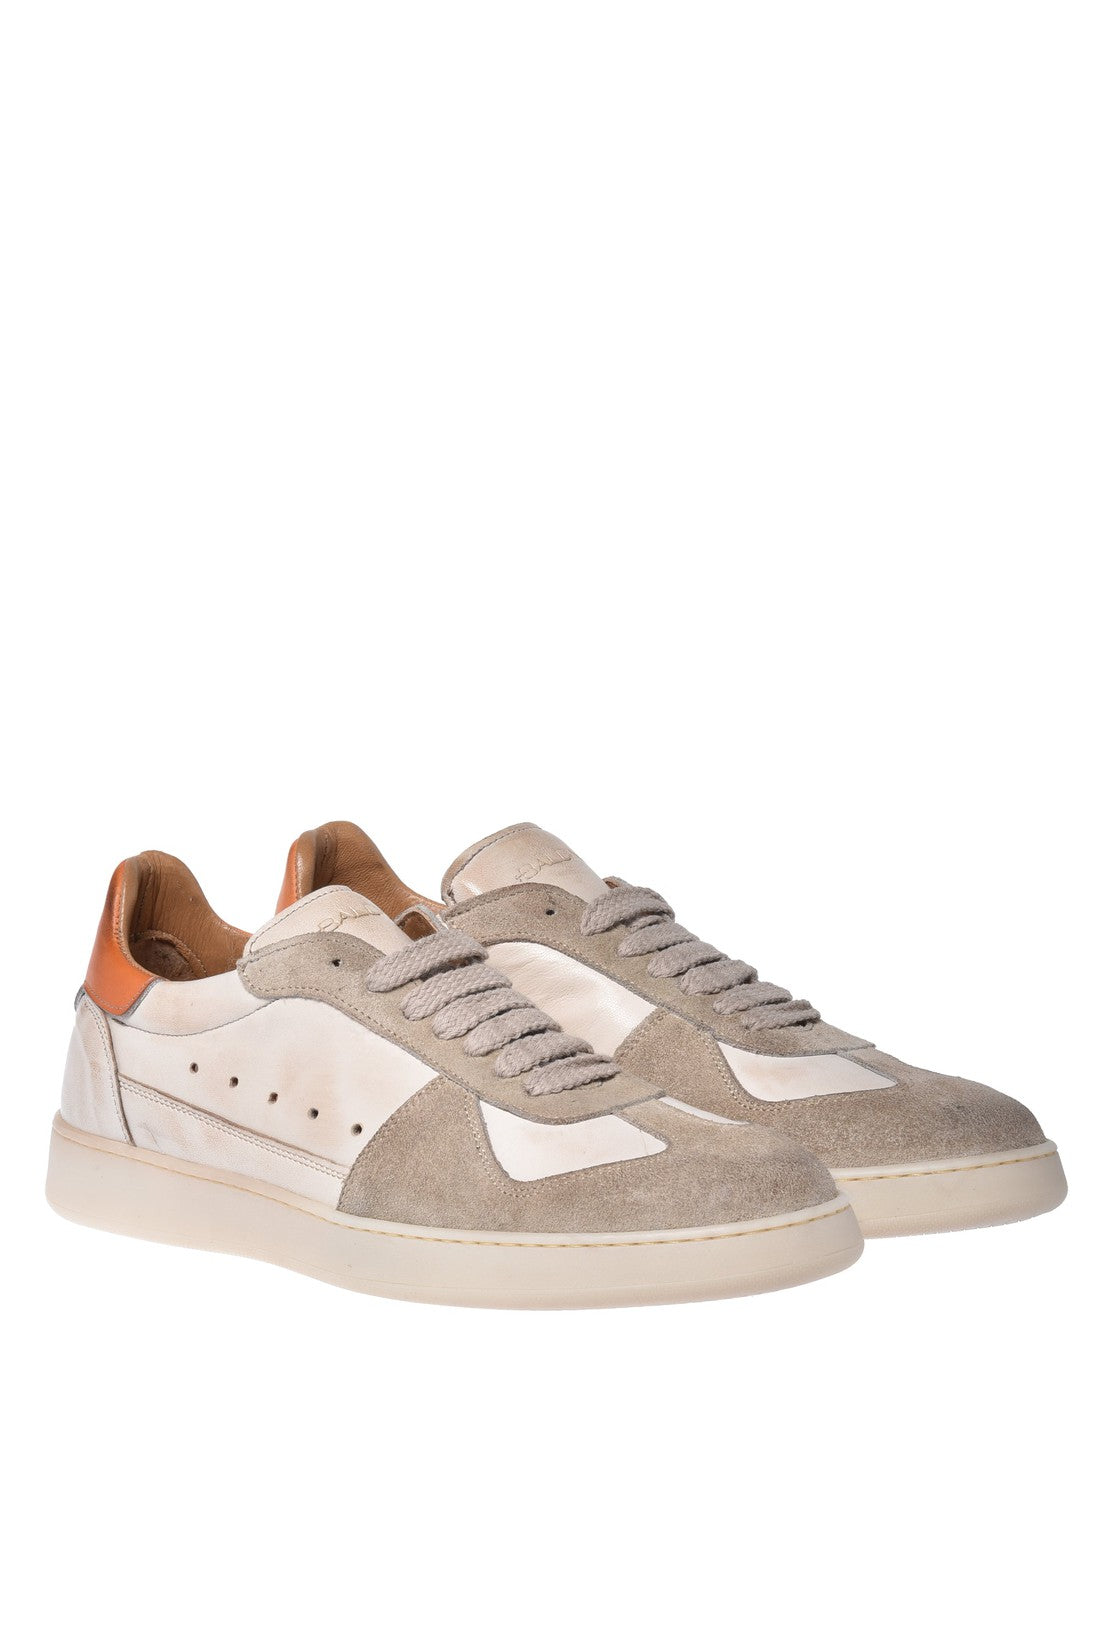 Sneaker in taupe and cream suede and calfskin